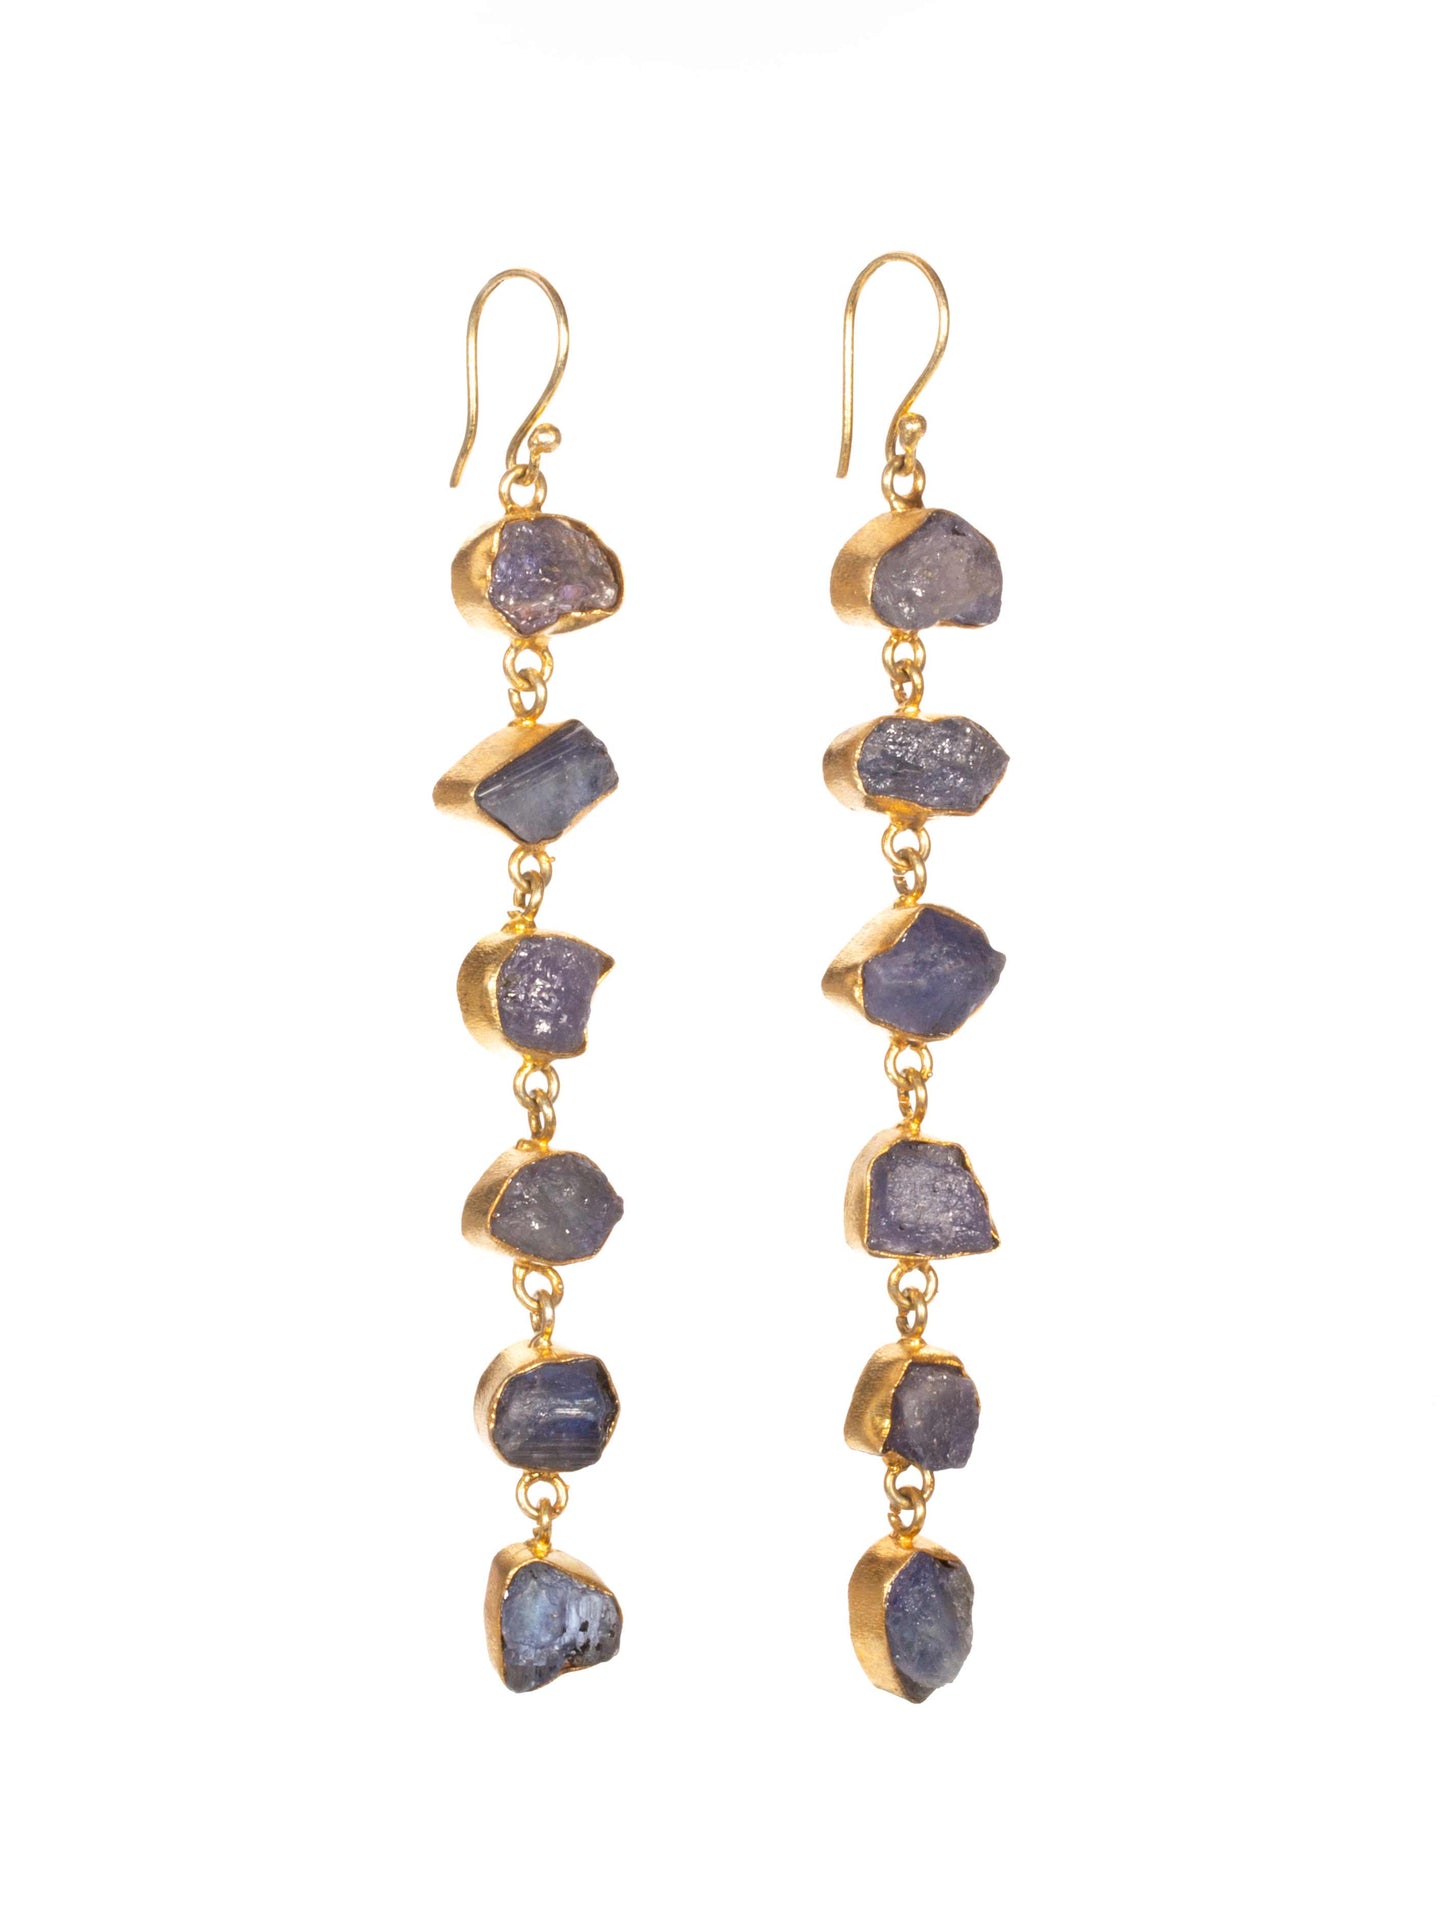 Gold Luxe earrings - a stunning and glamorous six drop stone